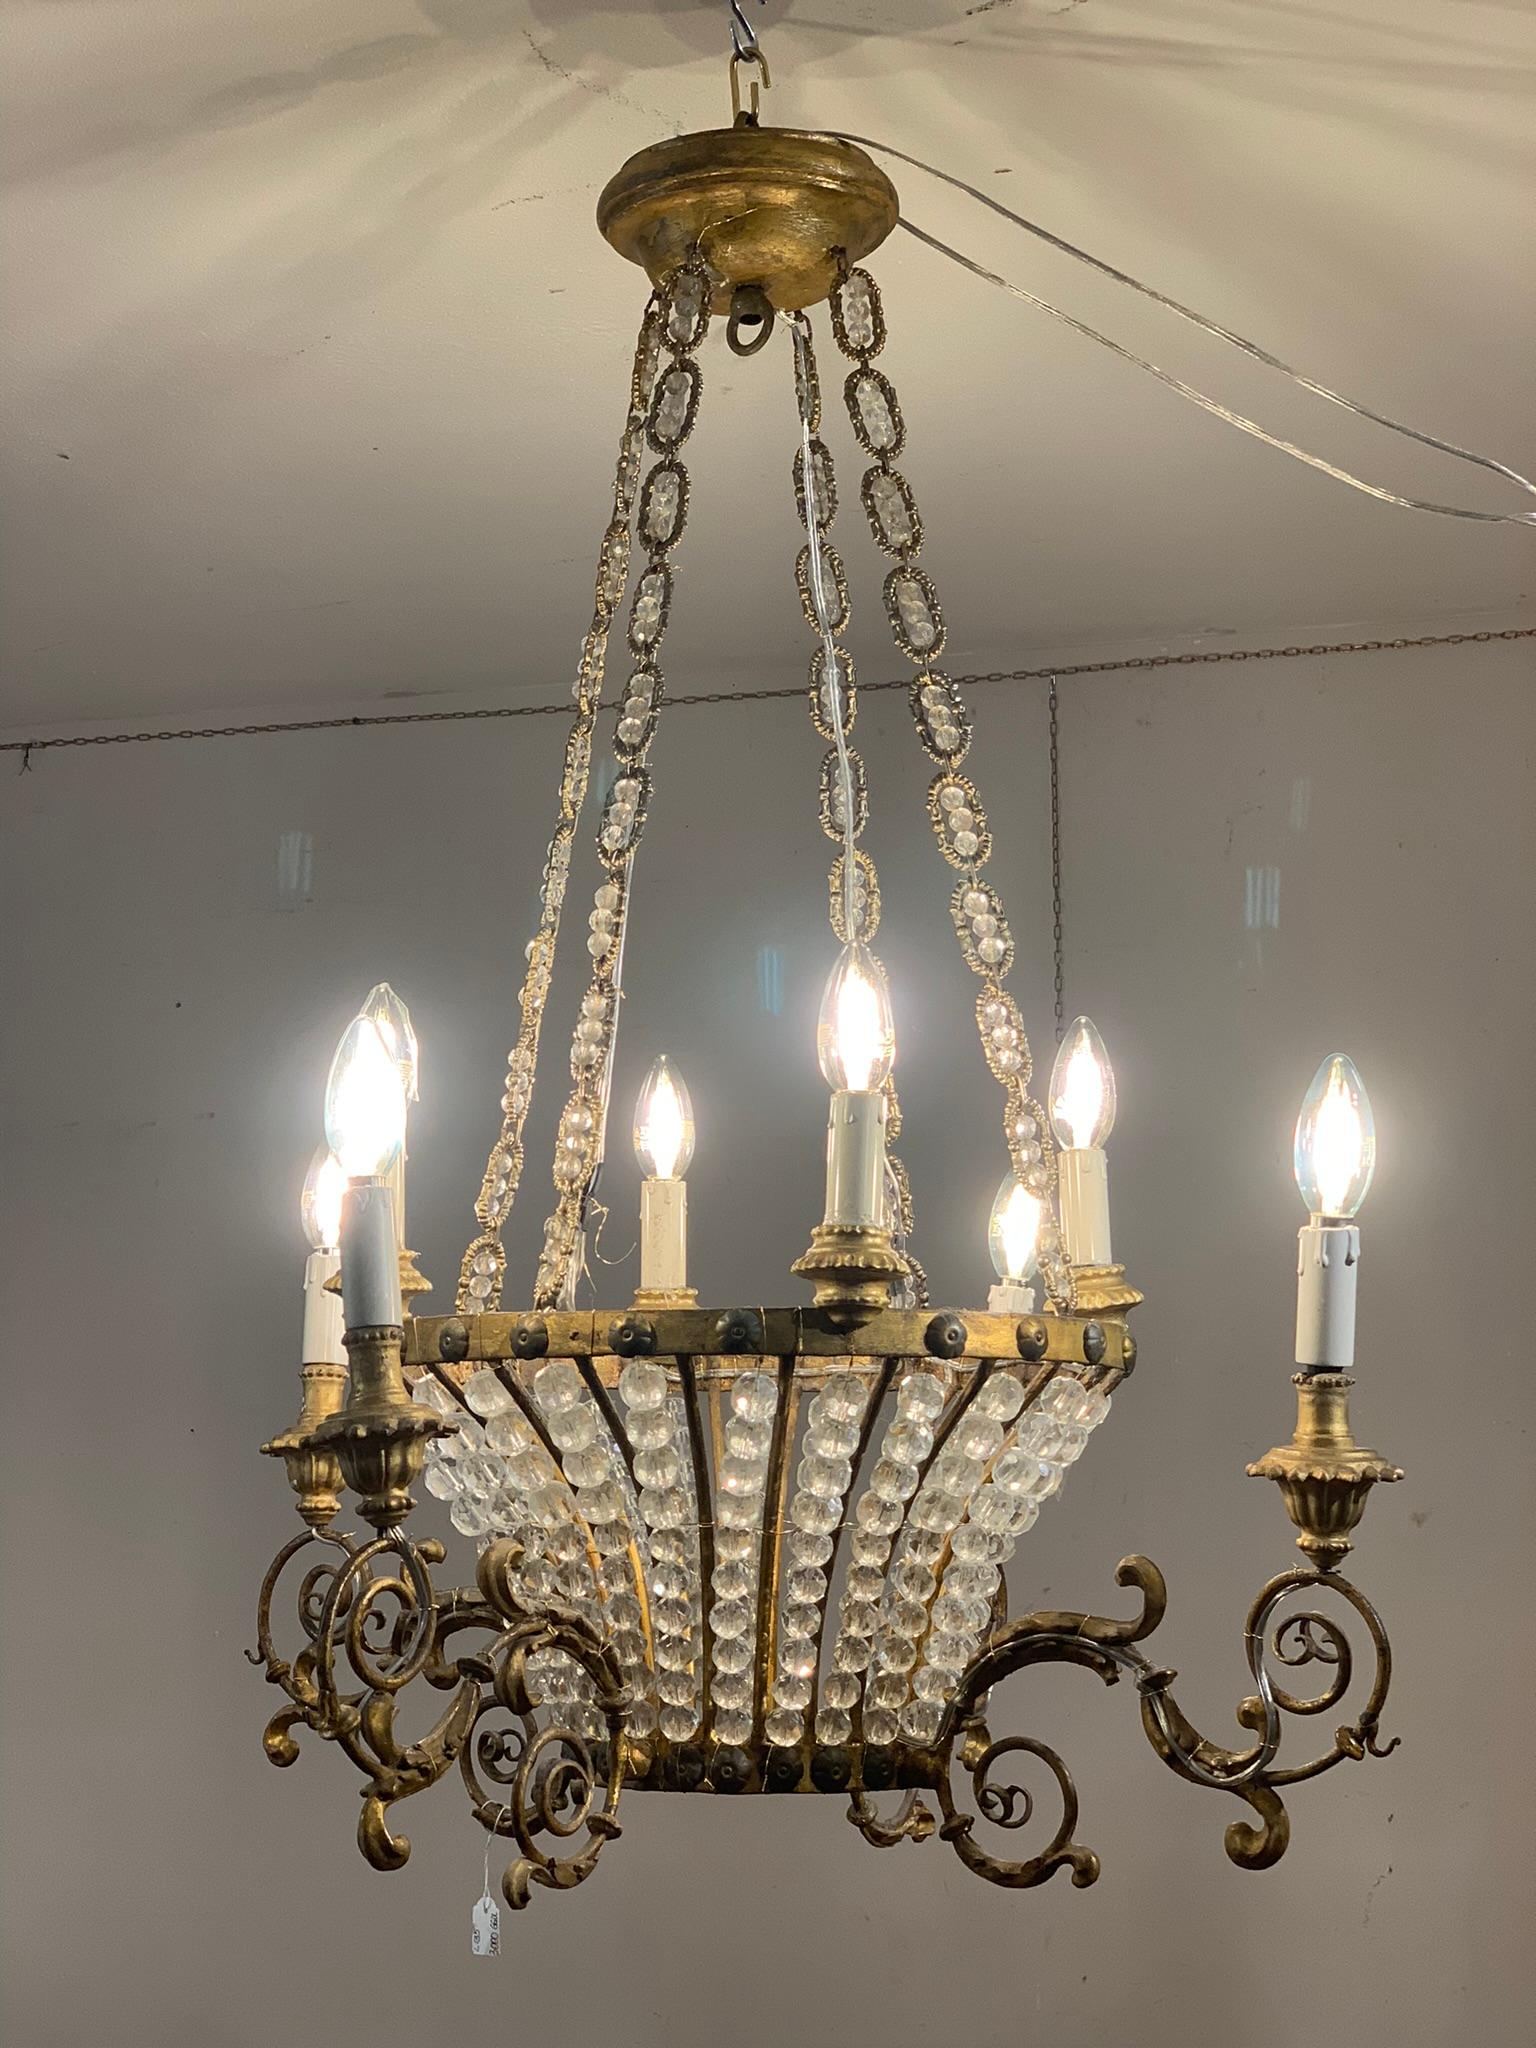 Beautiful basket chandelier, structure in gilded iron and spherical crystals, chains with crystal applications. Eight double move candle holder arms with flower bobeche.
It is possible to add a central light inside the basket and slightly lower the